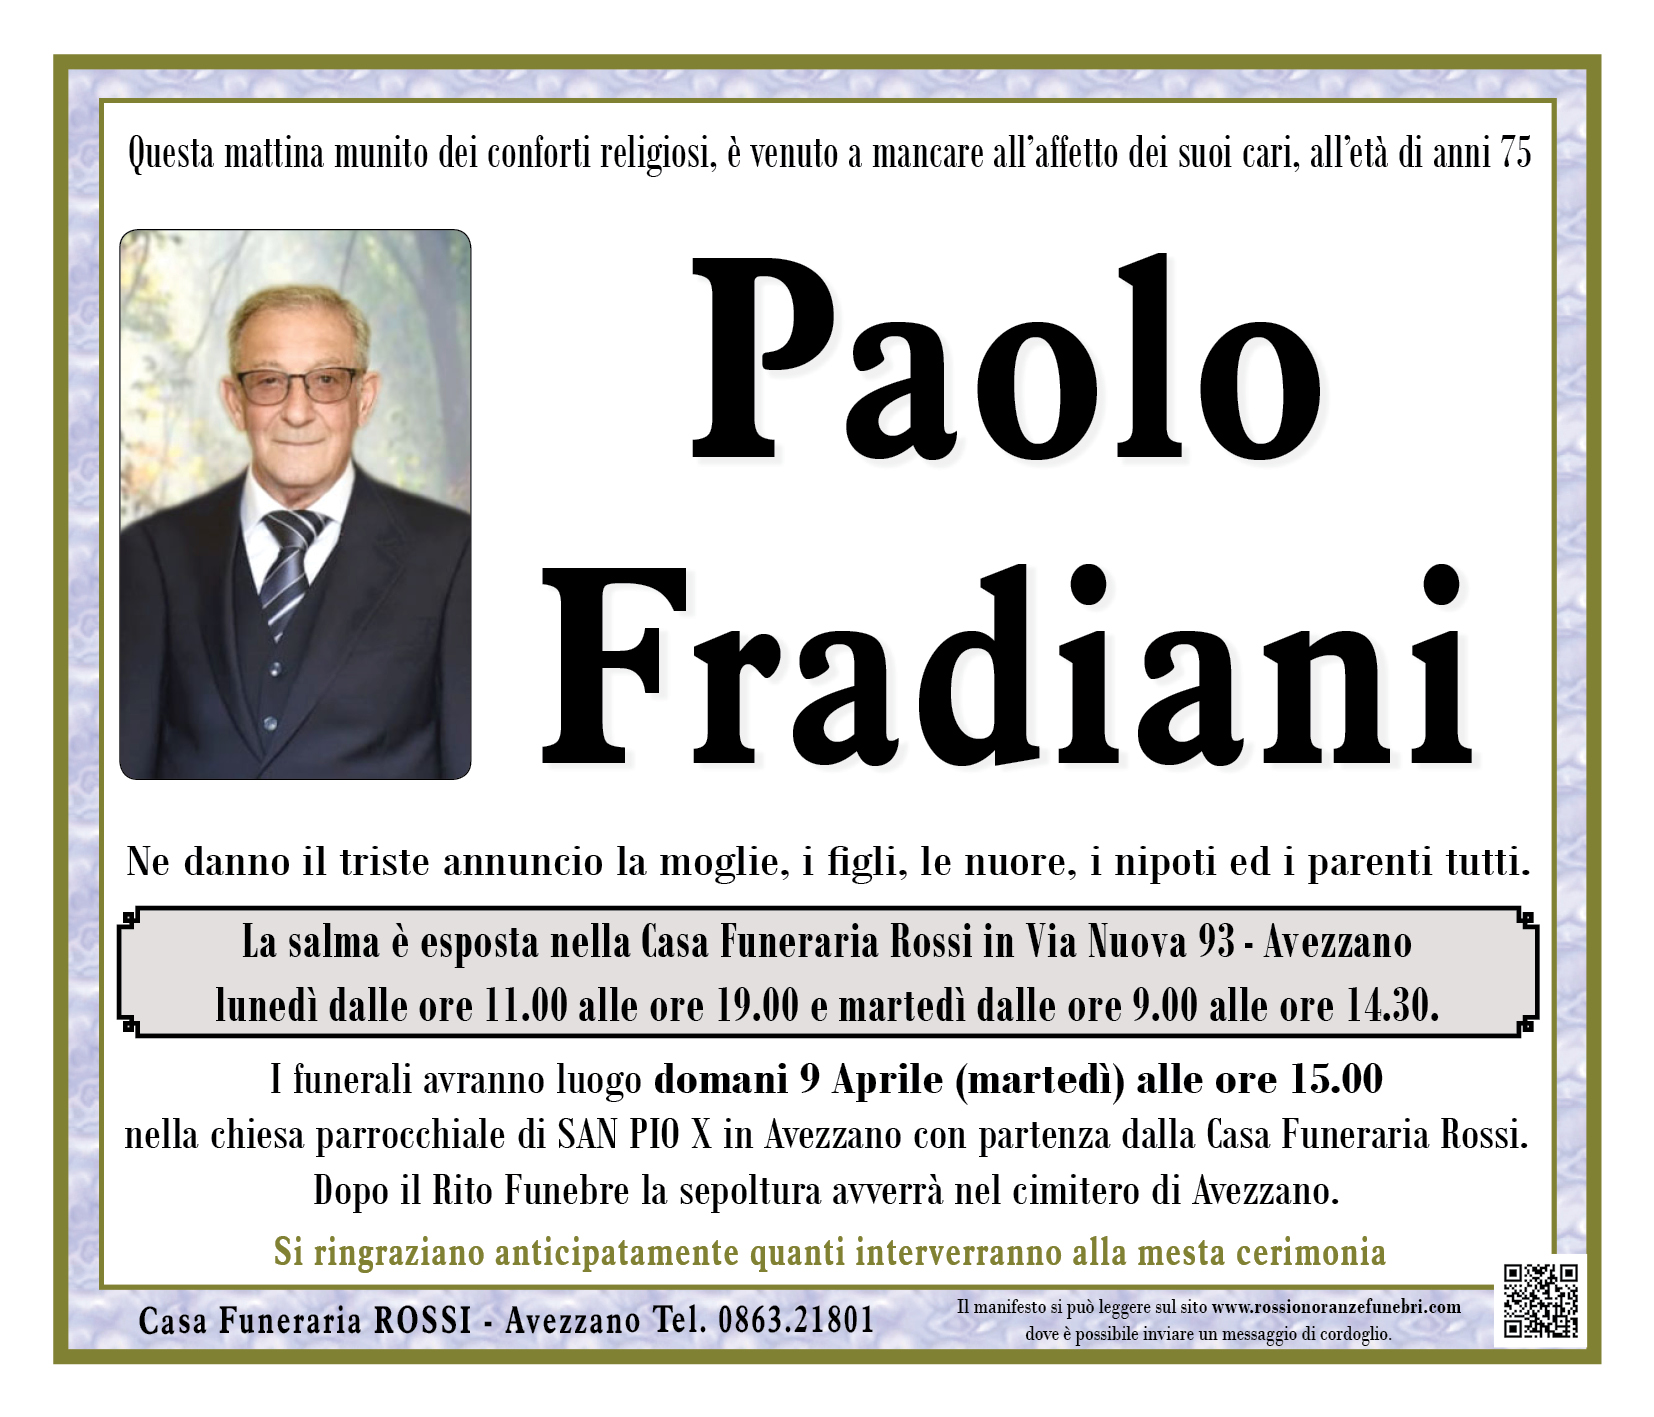 Paolo Fradiani